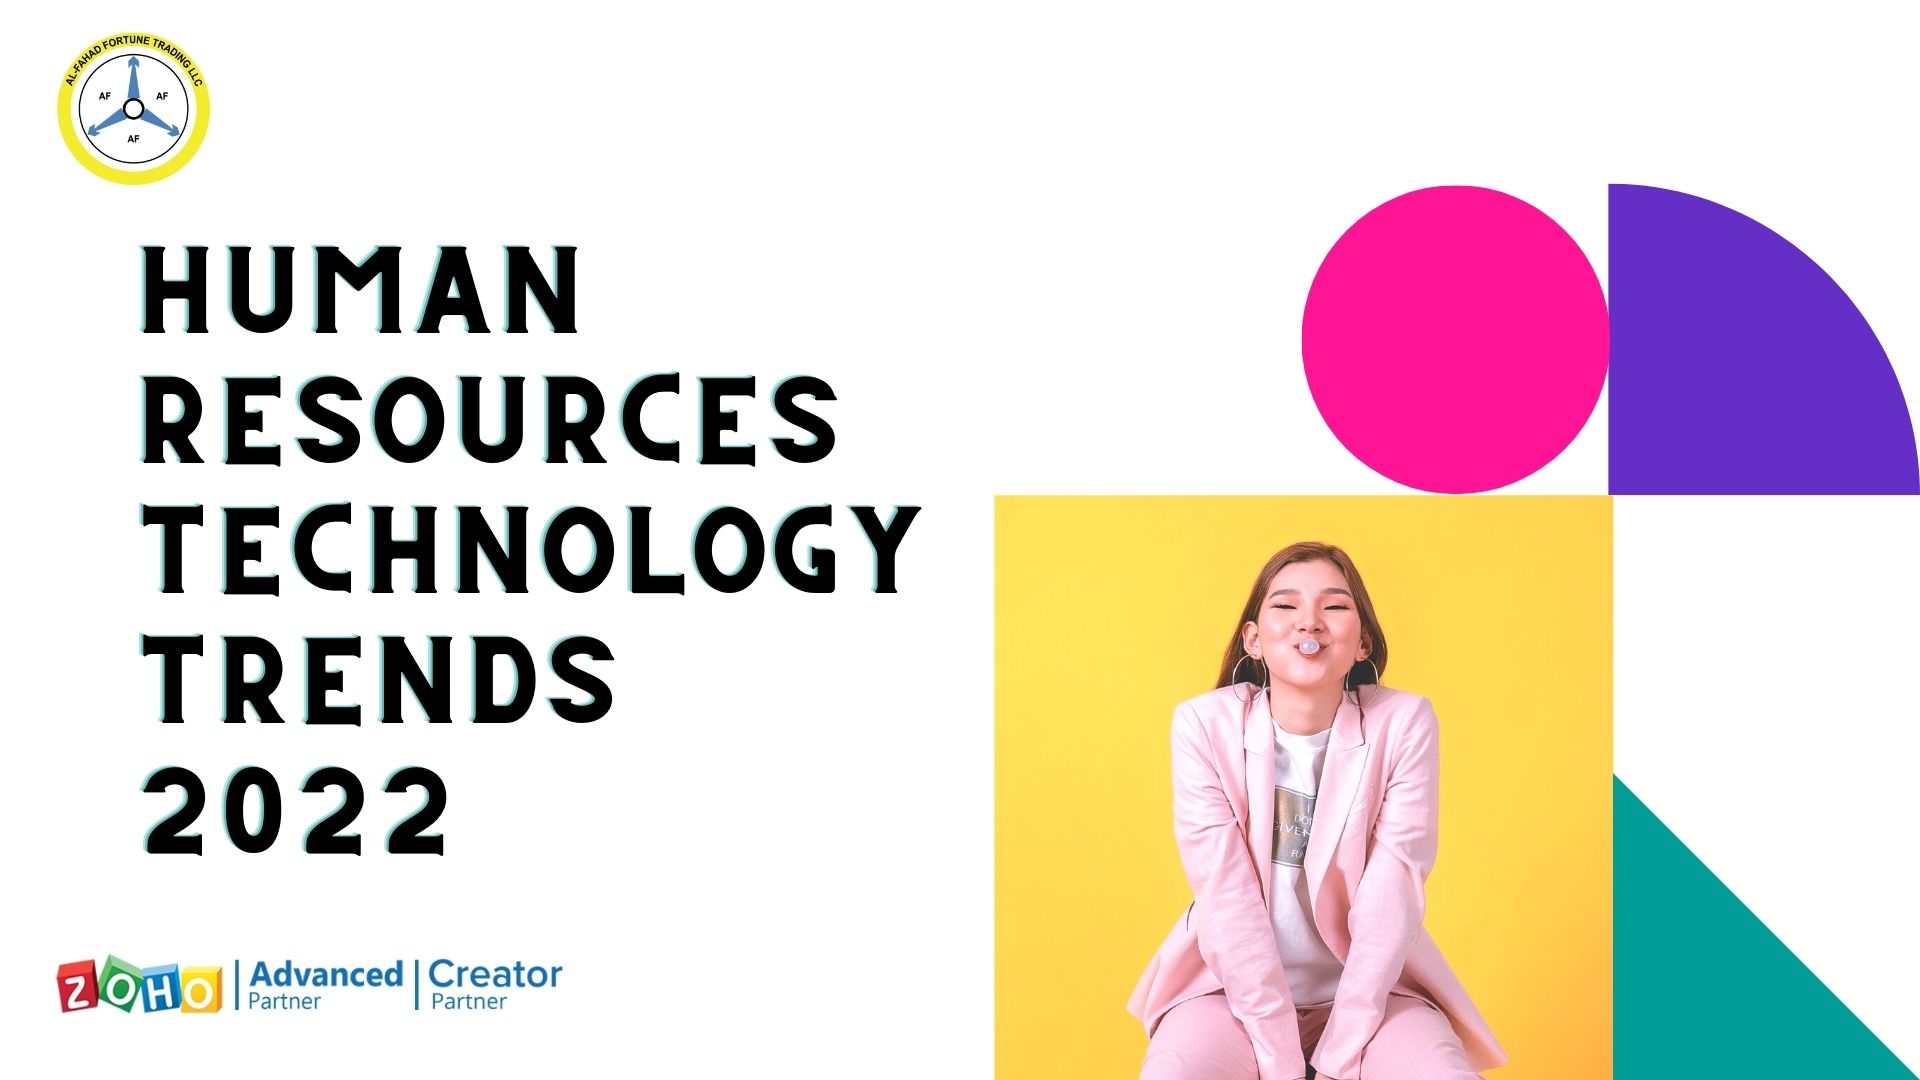 Human Resources Technology Trends 2022